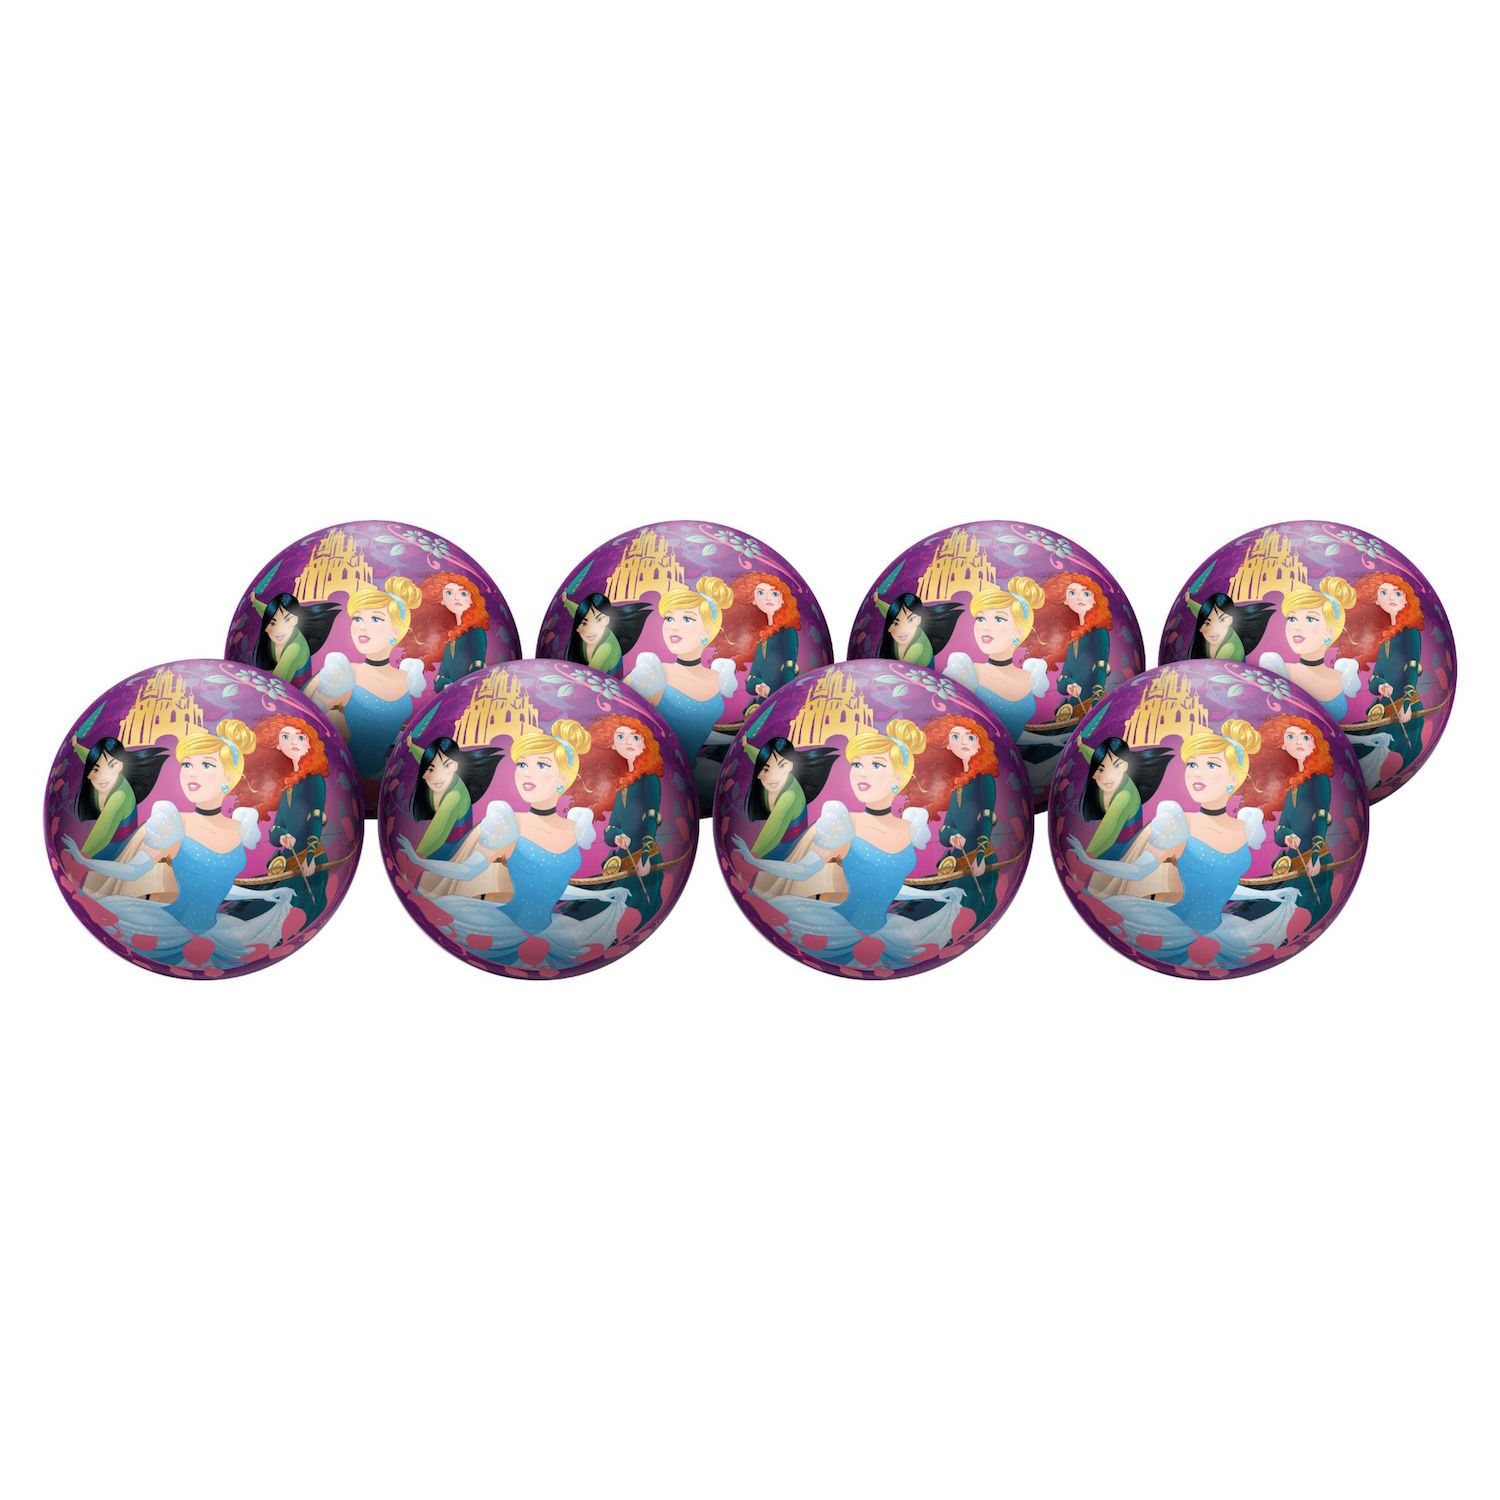 Image for Hedstrom Disney Princess 8-Pack Playball Party Pack at Kohl's.